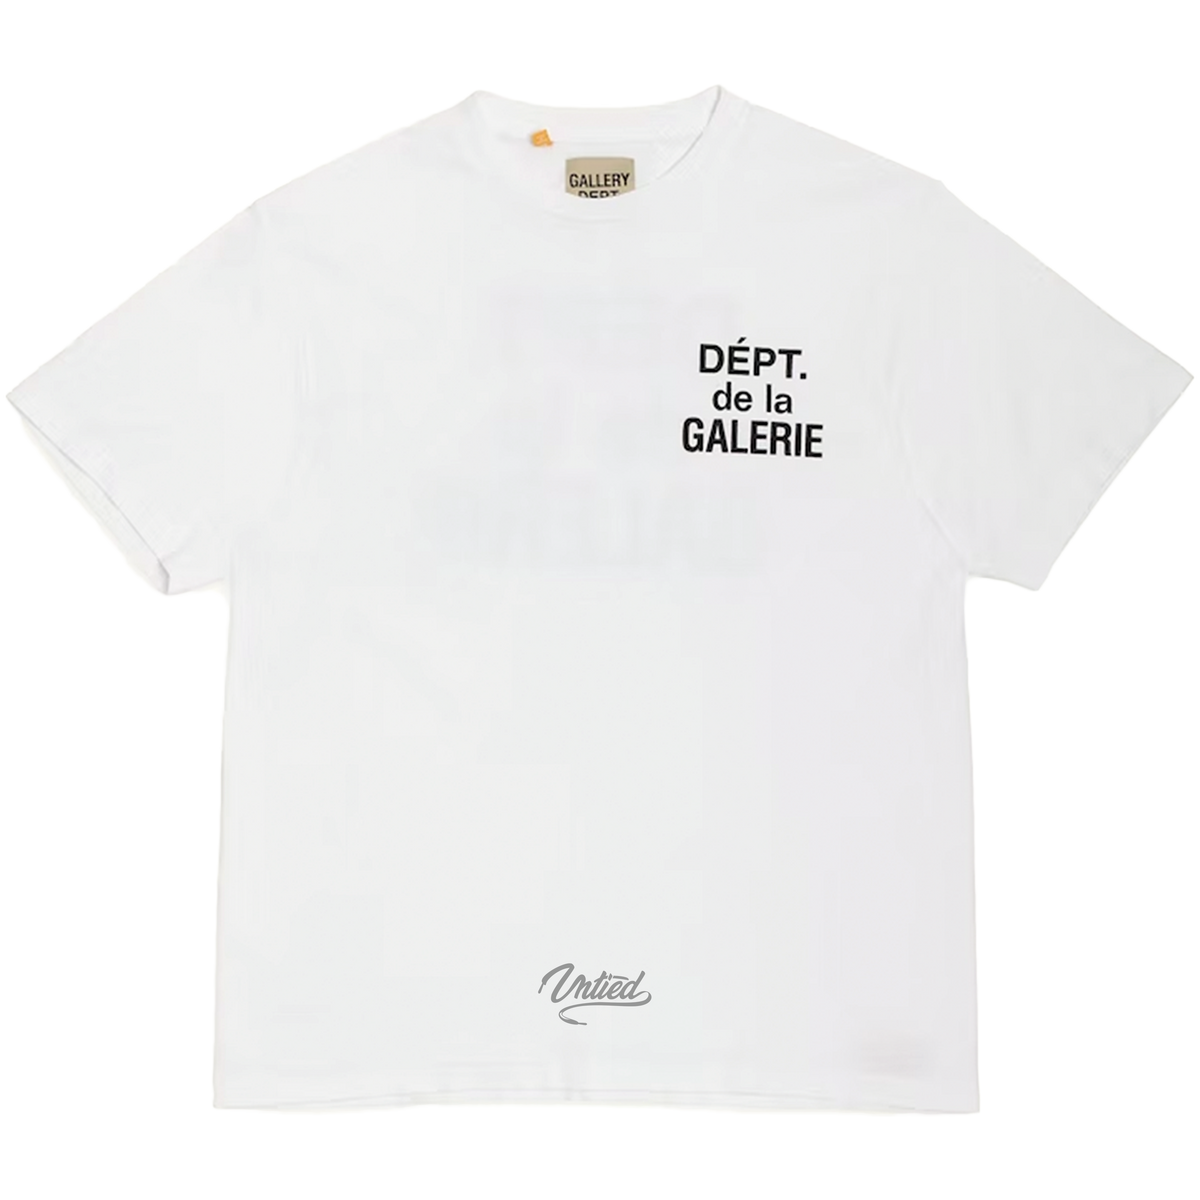 Gallery Dept. French Tee "White"